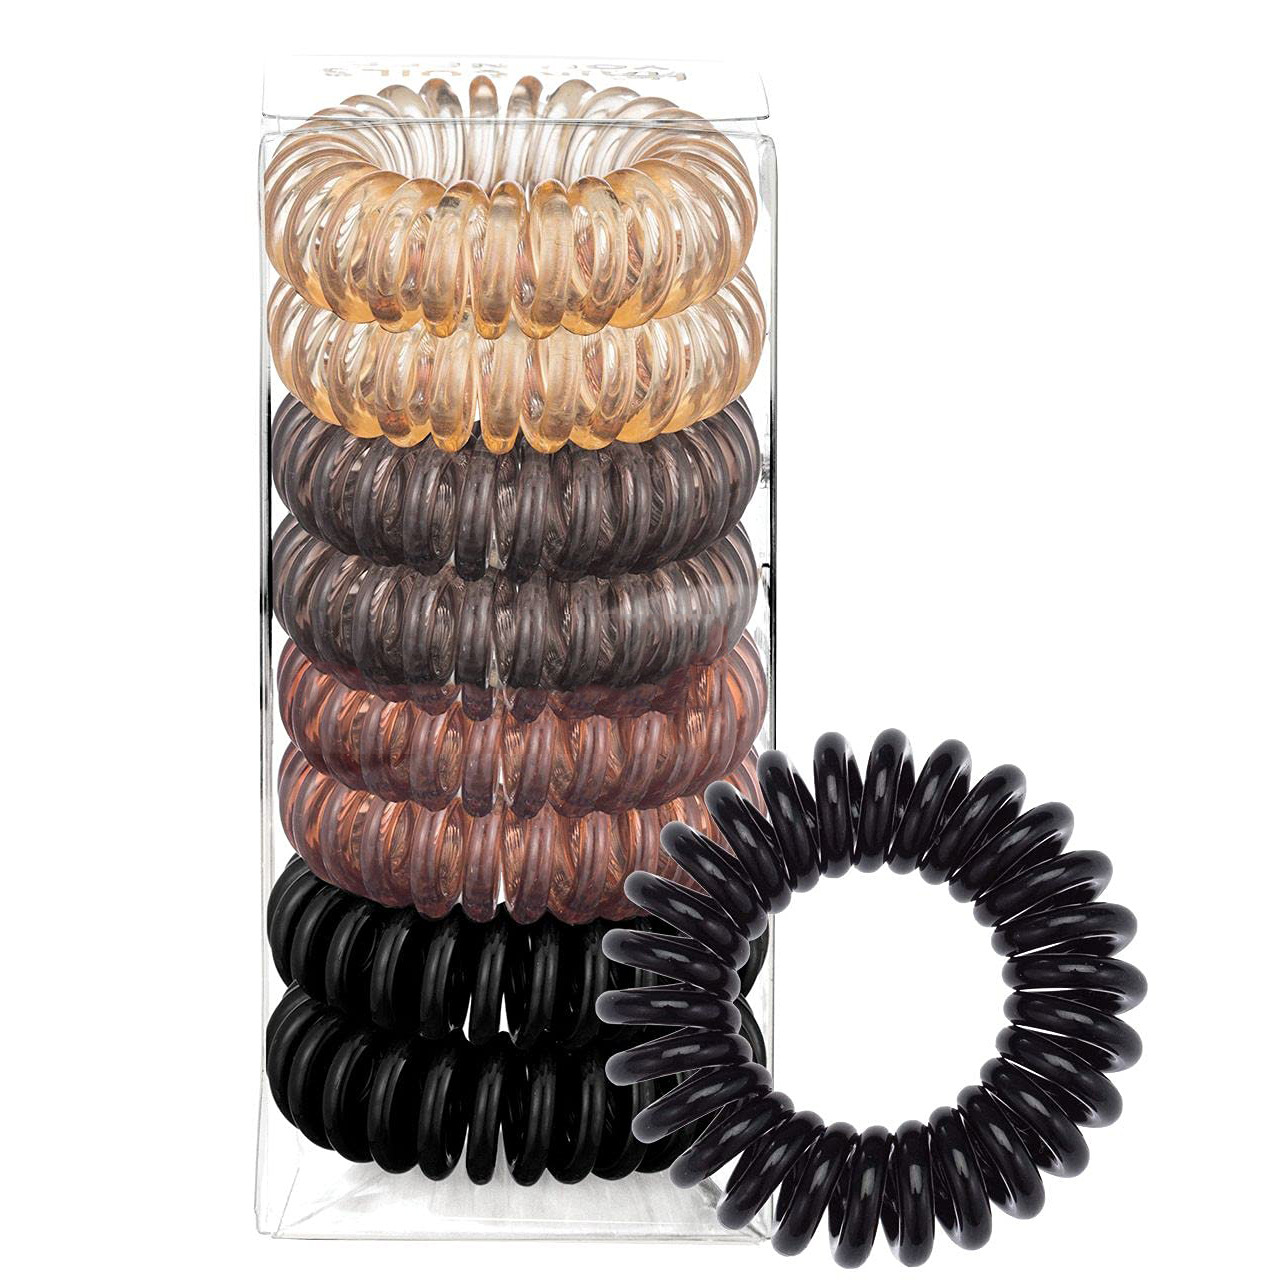 Colorful stretchy silicone wrist coil bracelet elastic coil spiraled hair ties set